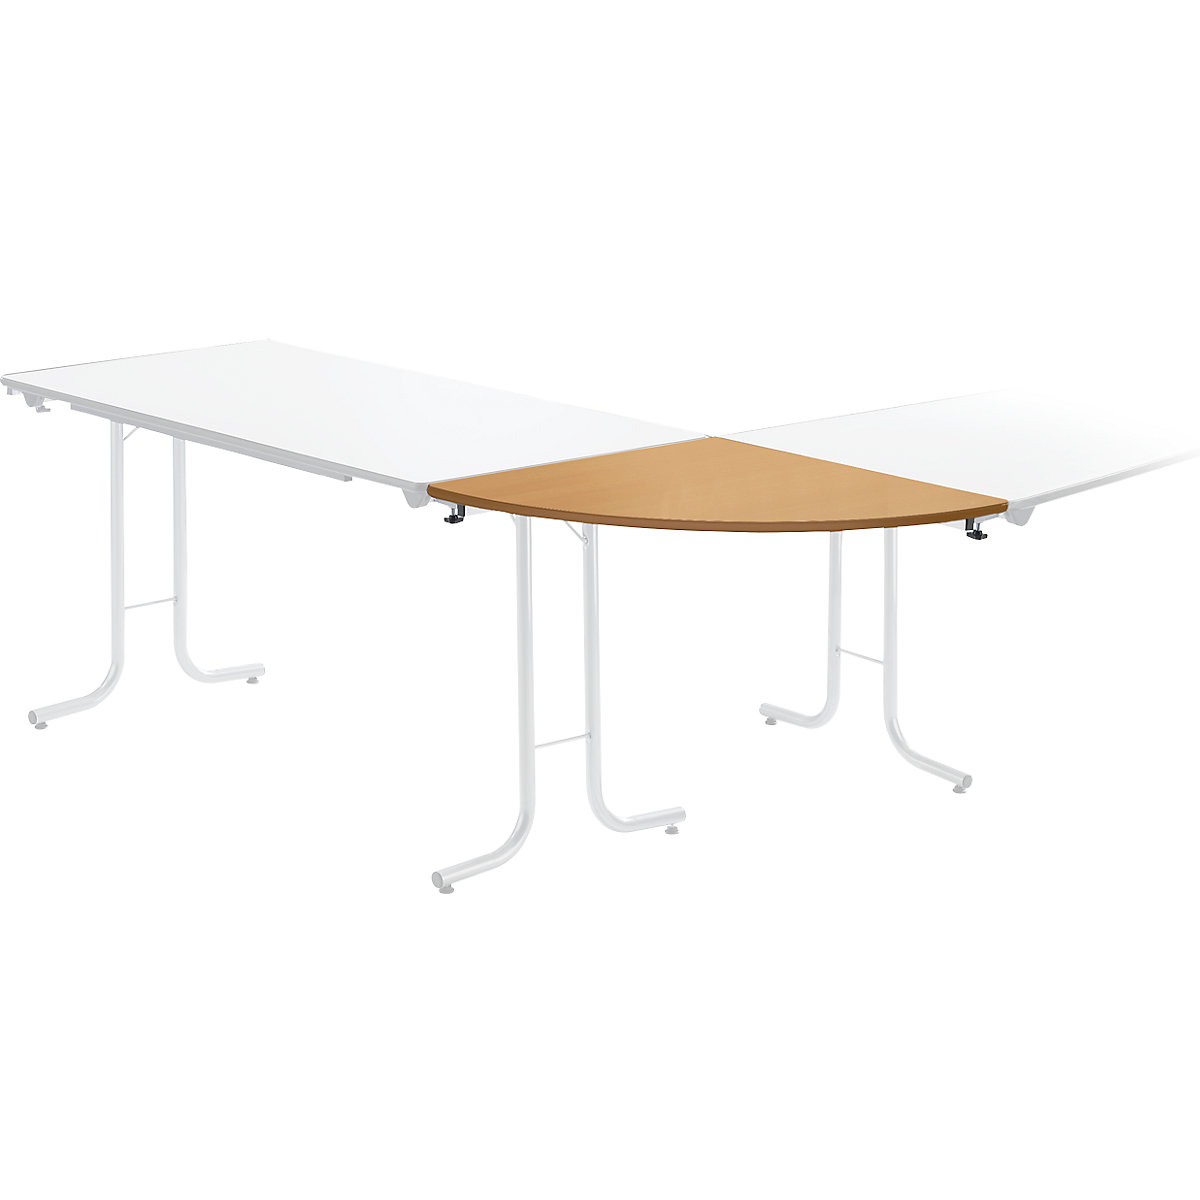 Extension table for folding table, quarter circle top, 700 x 700 mm, aluminium coloured frame, beech finish tabletop-3